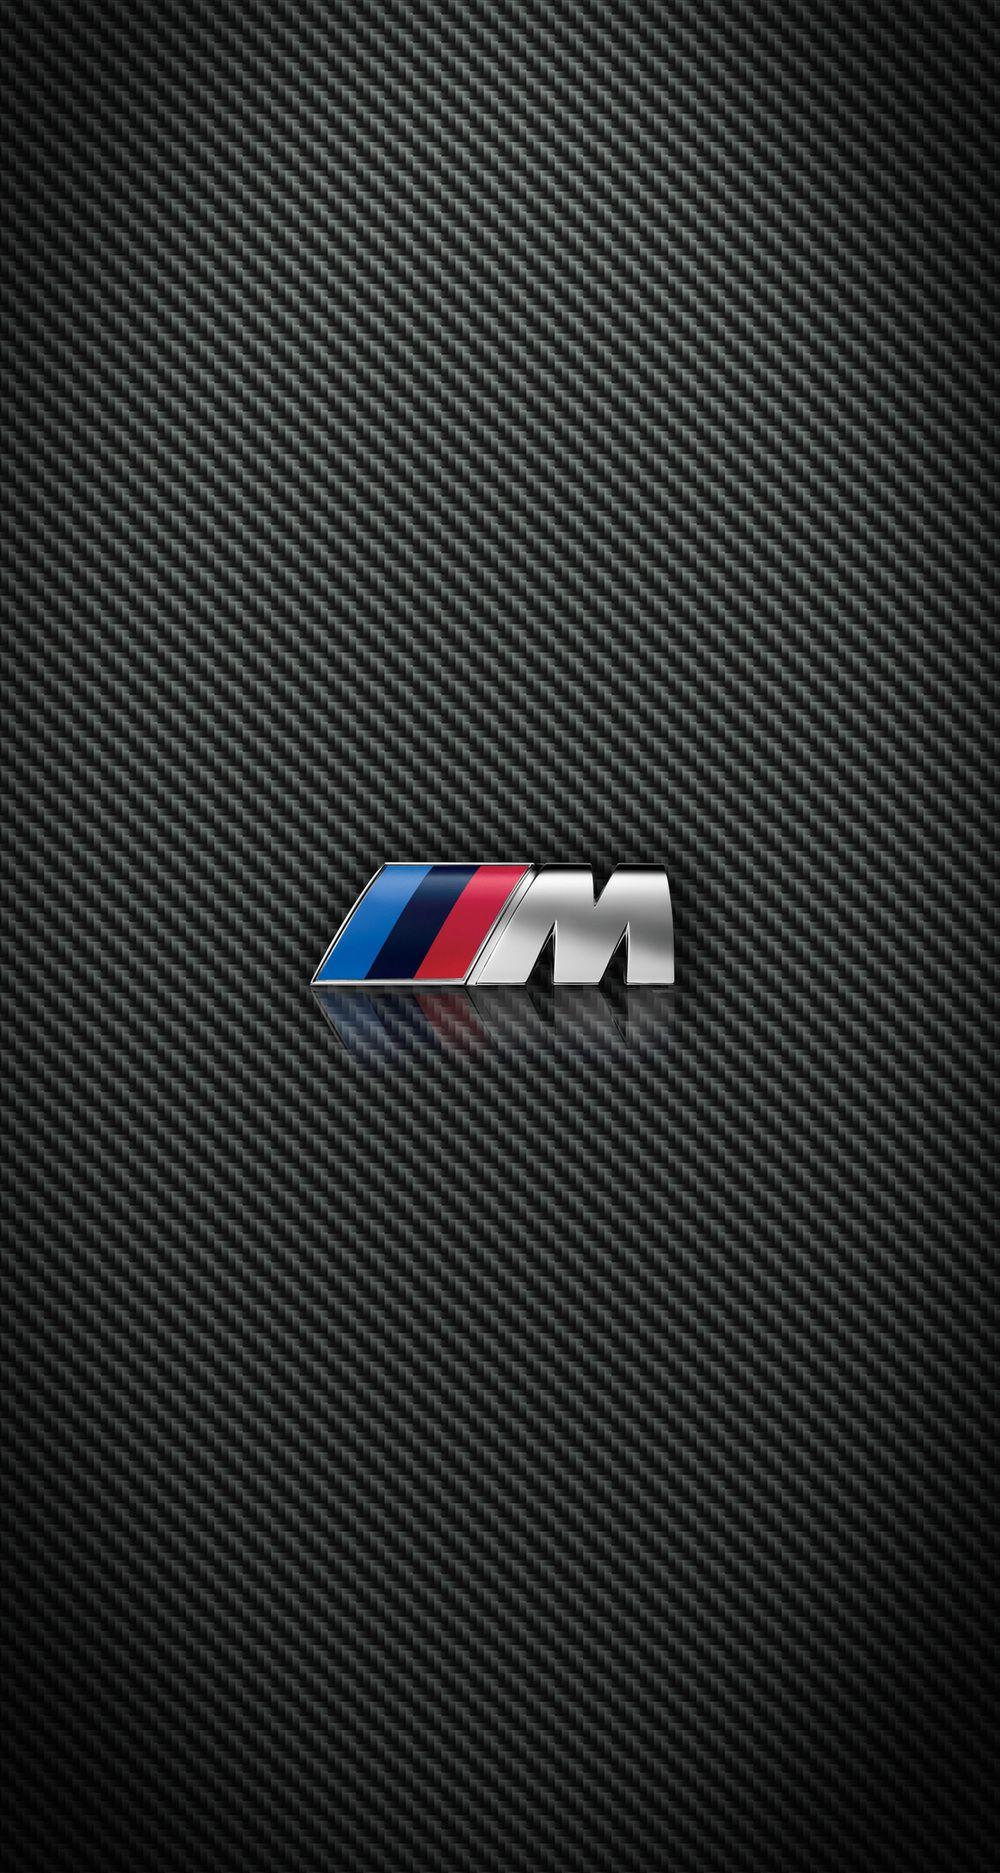 Bmw M Iphone Wallpapers Top Free Bmw M Iphone Backgrounds Wallpaperaccess